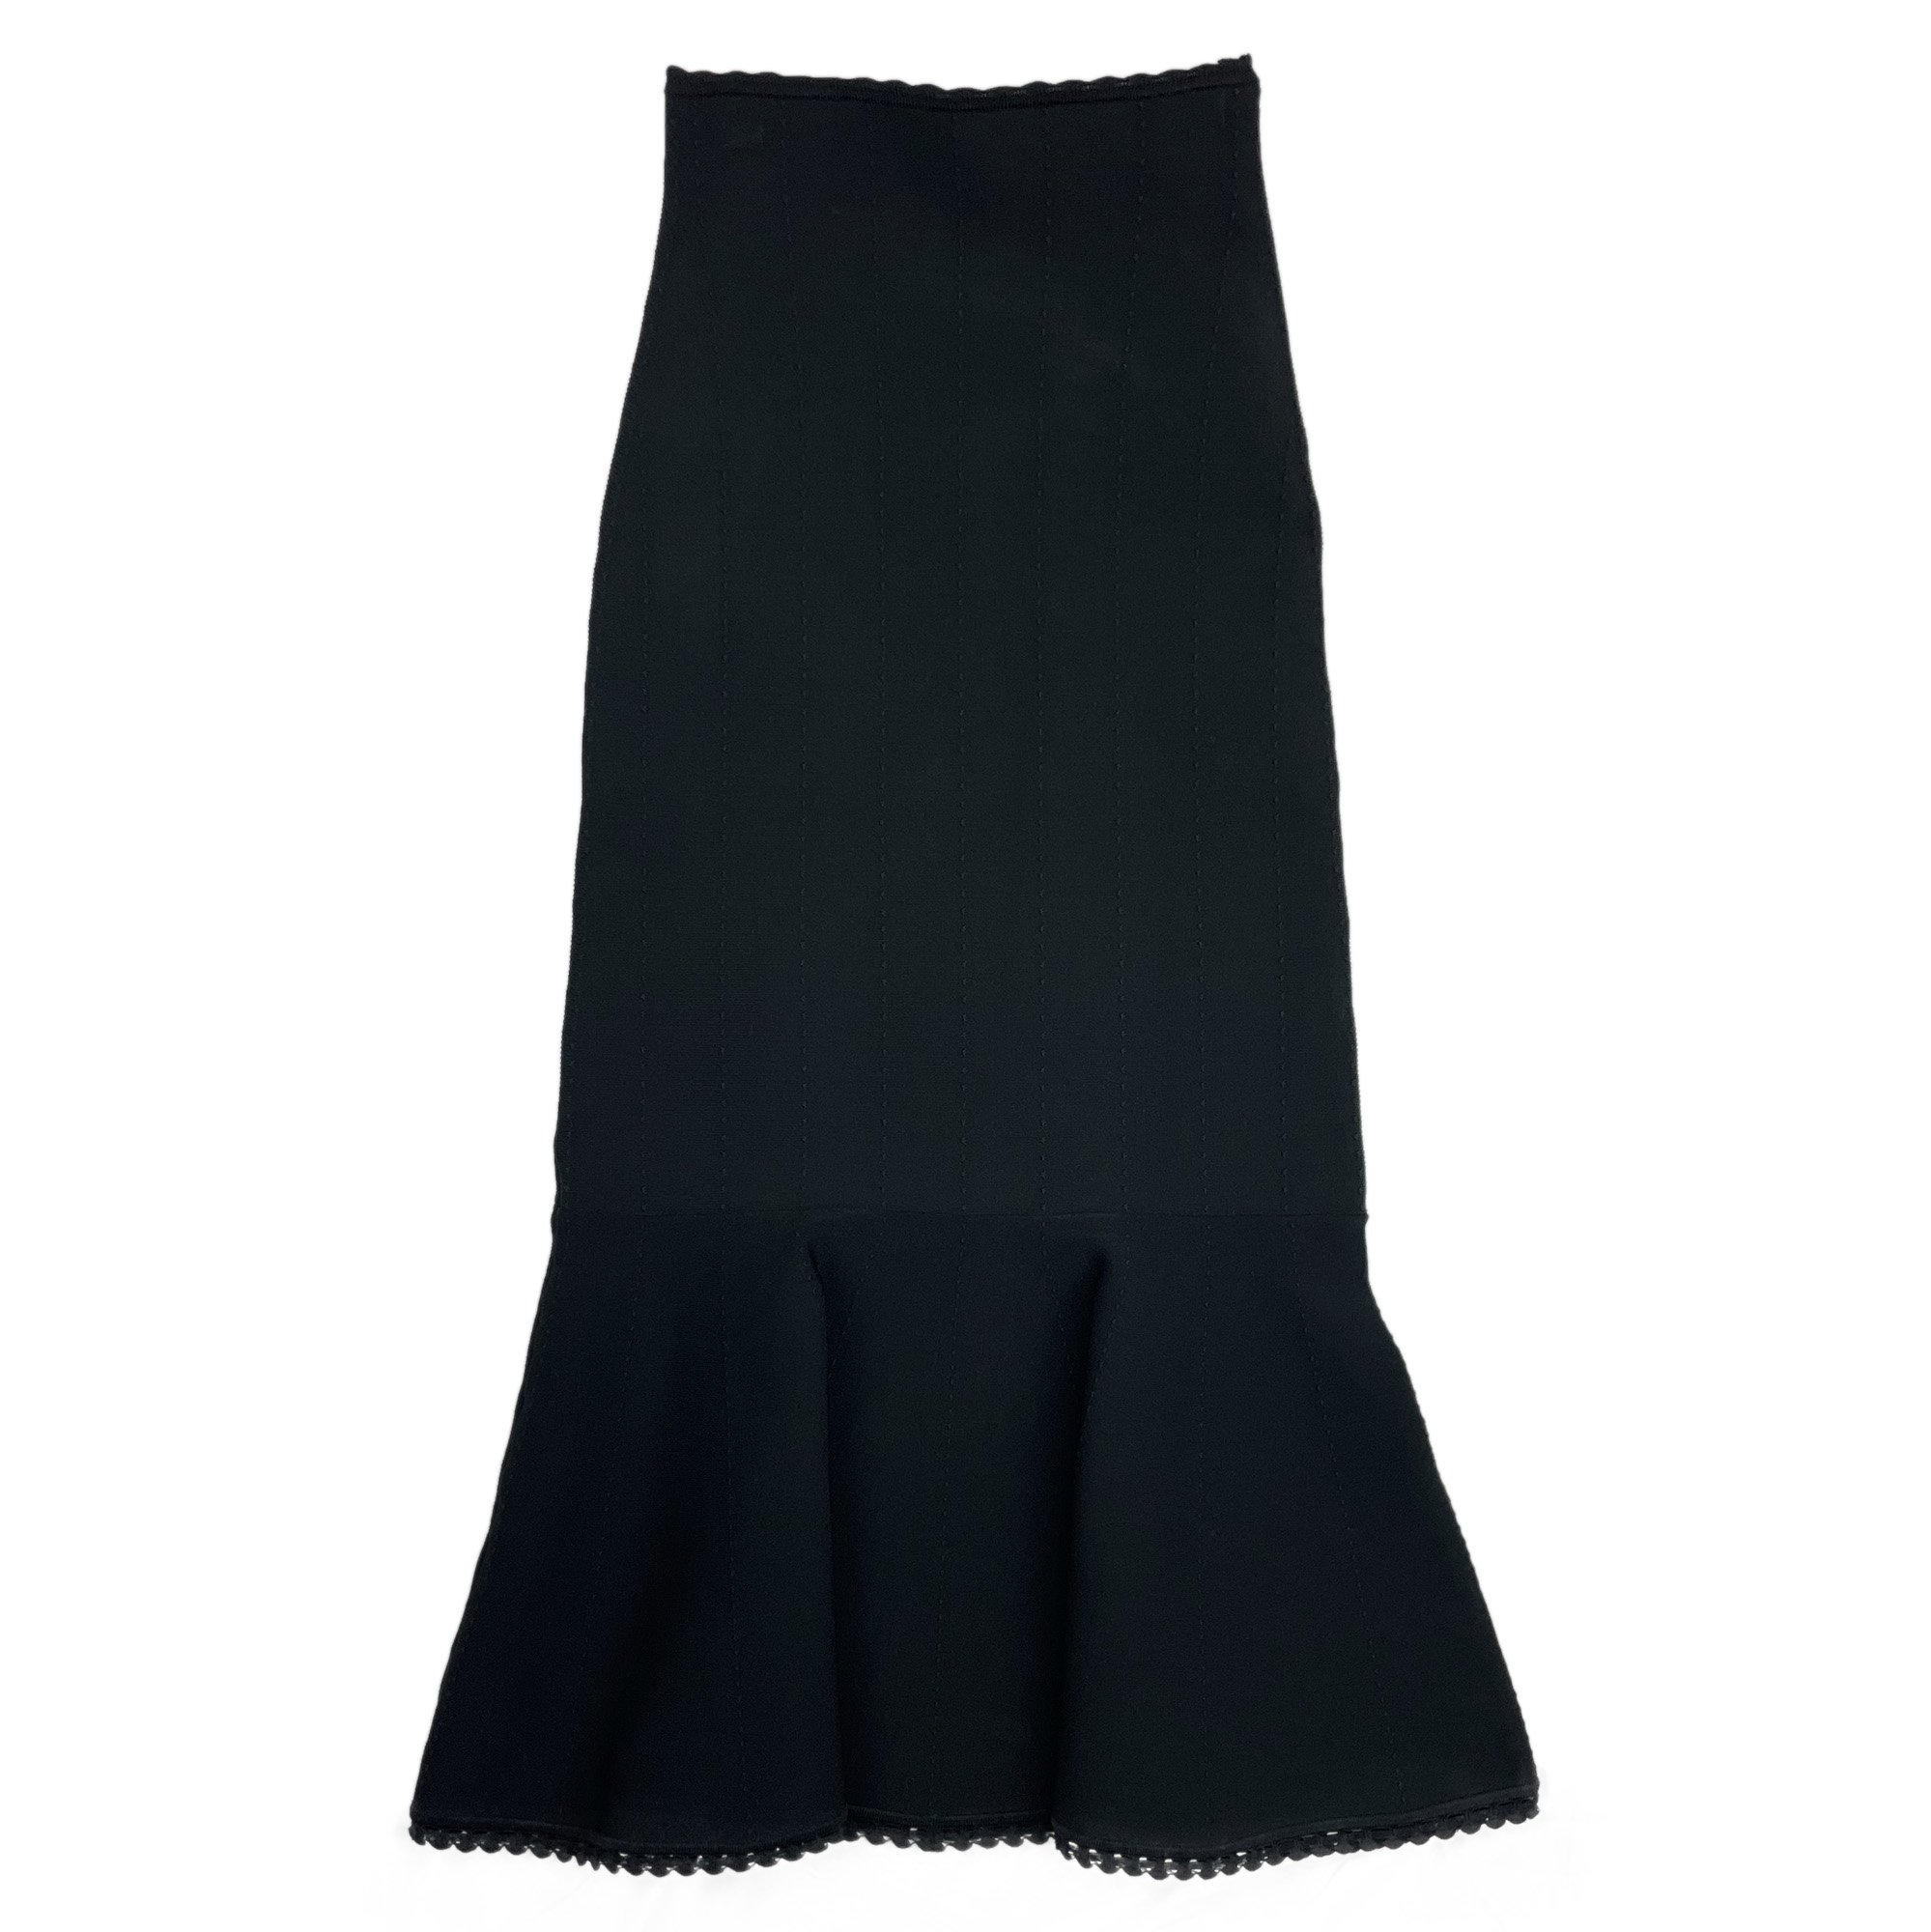 <img class='new_mark_img1' src='https://img.shop-pro.jp/img/new/icons7.gif' style='border:none;display:inline;margin:0px;padding:0px;width:auto;' />VICTORIA BECKHAM KNIT SKIRTBLACK